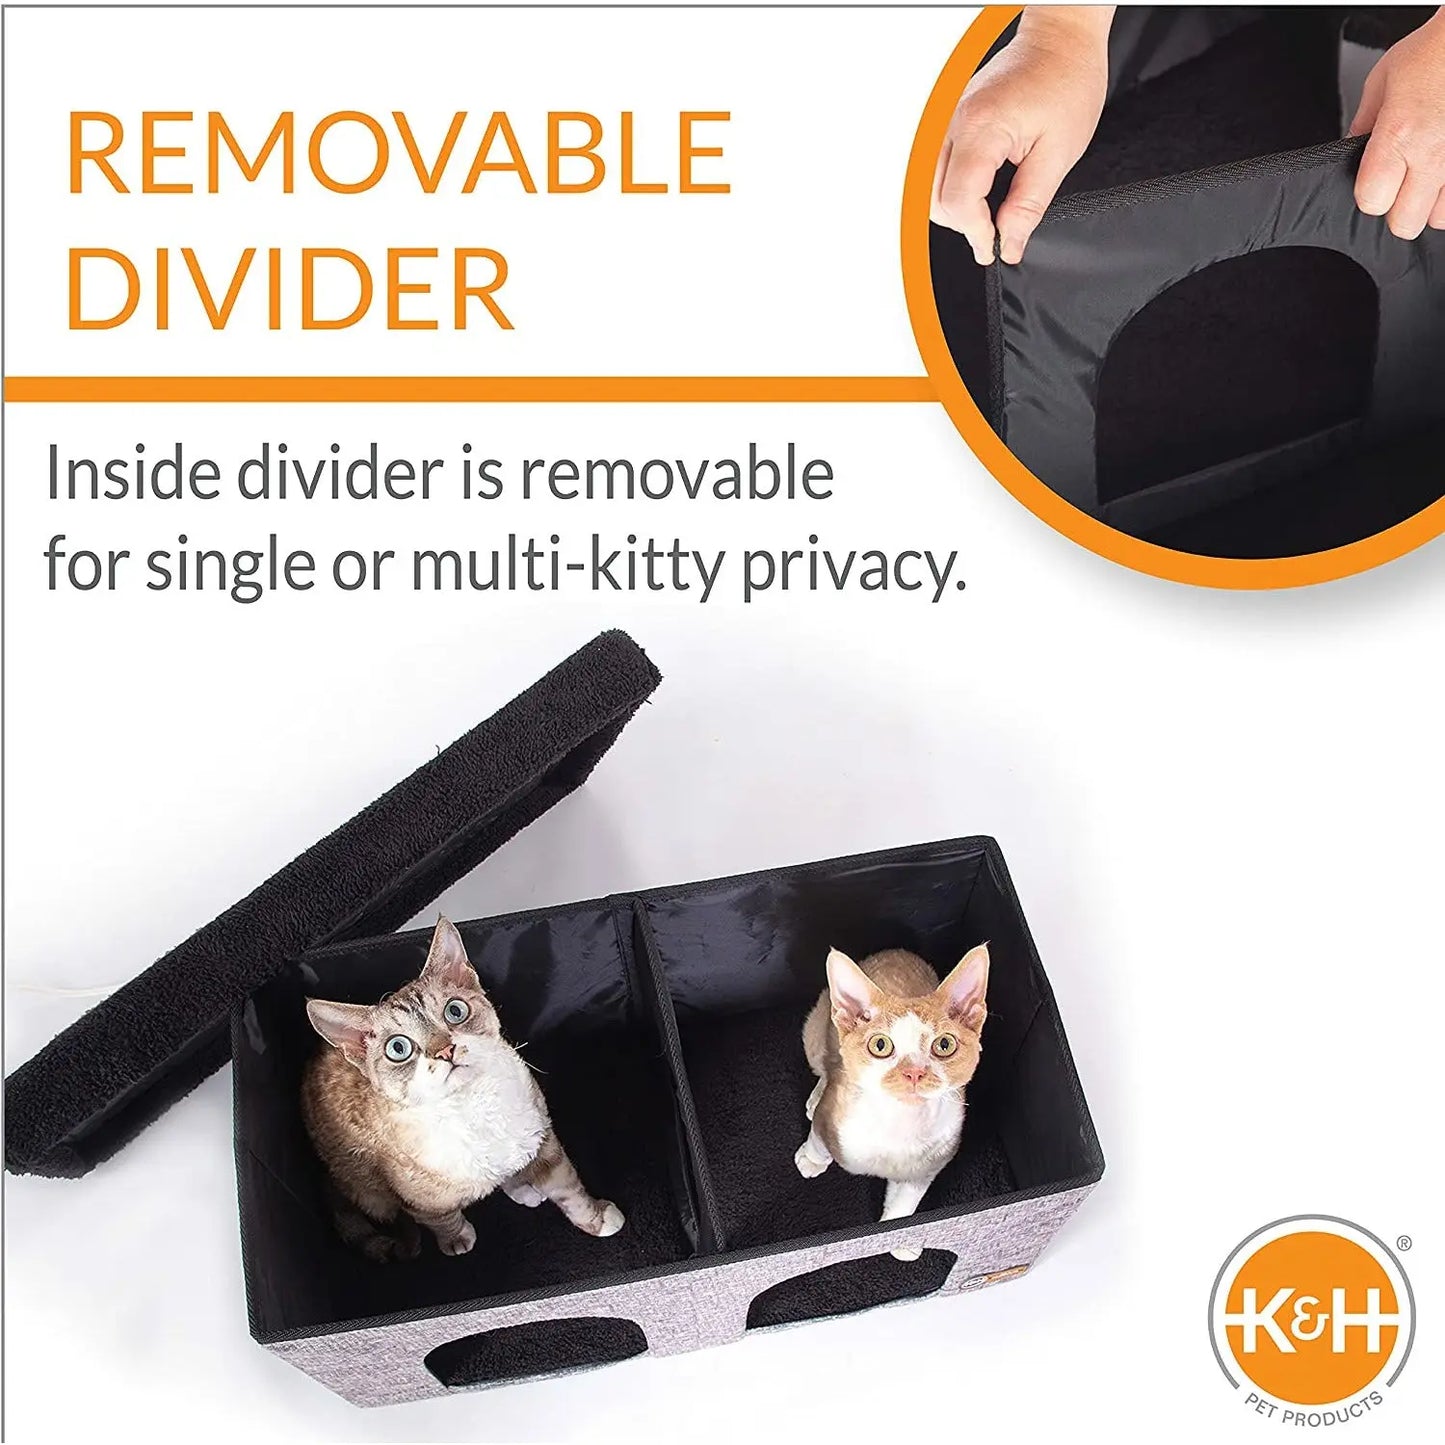 Thermo-Kitty Duplex in Classy Gray, 12" x 24" x 12" 4W K&H Pet Products